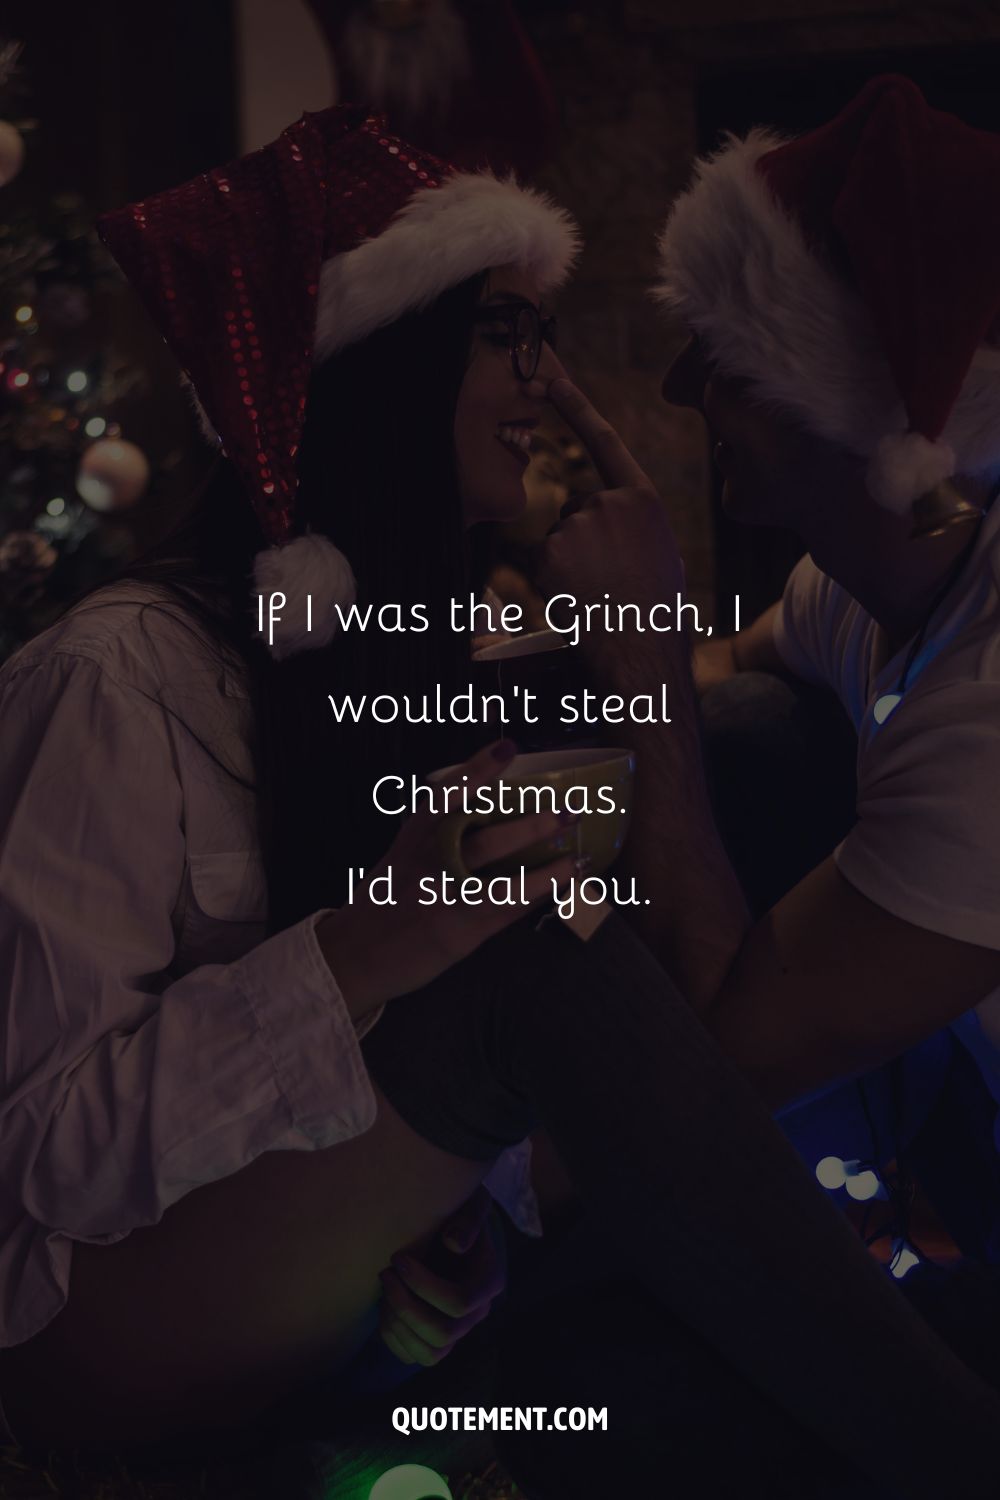 A playful couple in Santa's hats representing an irresistible Christmas pick up line